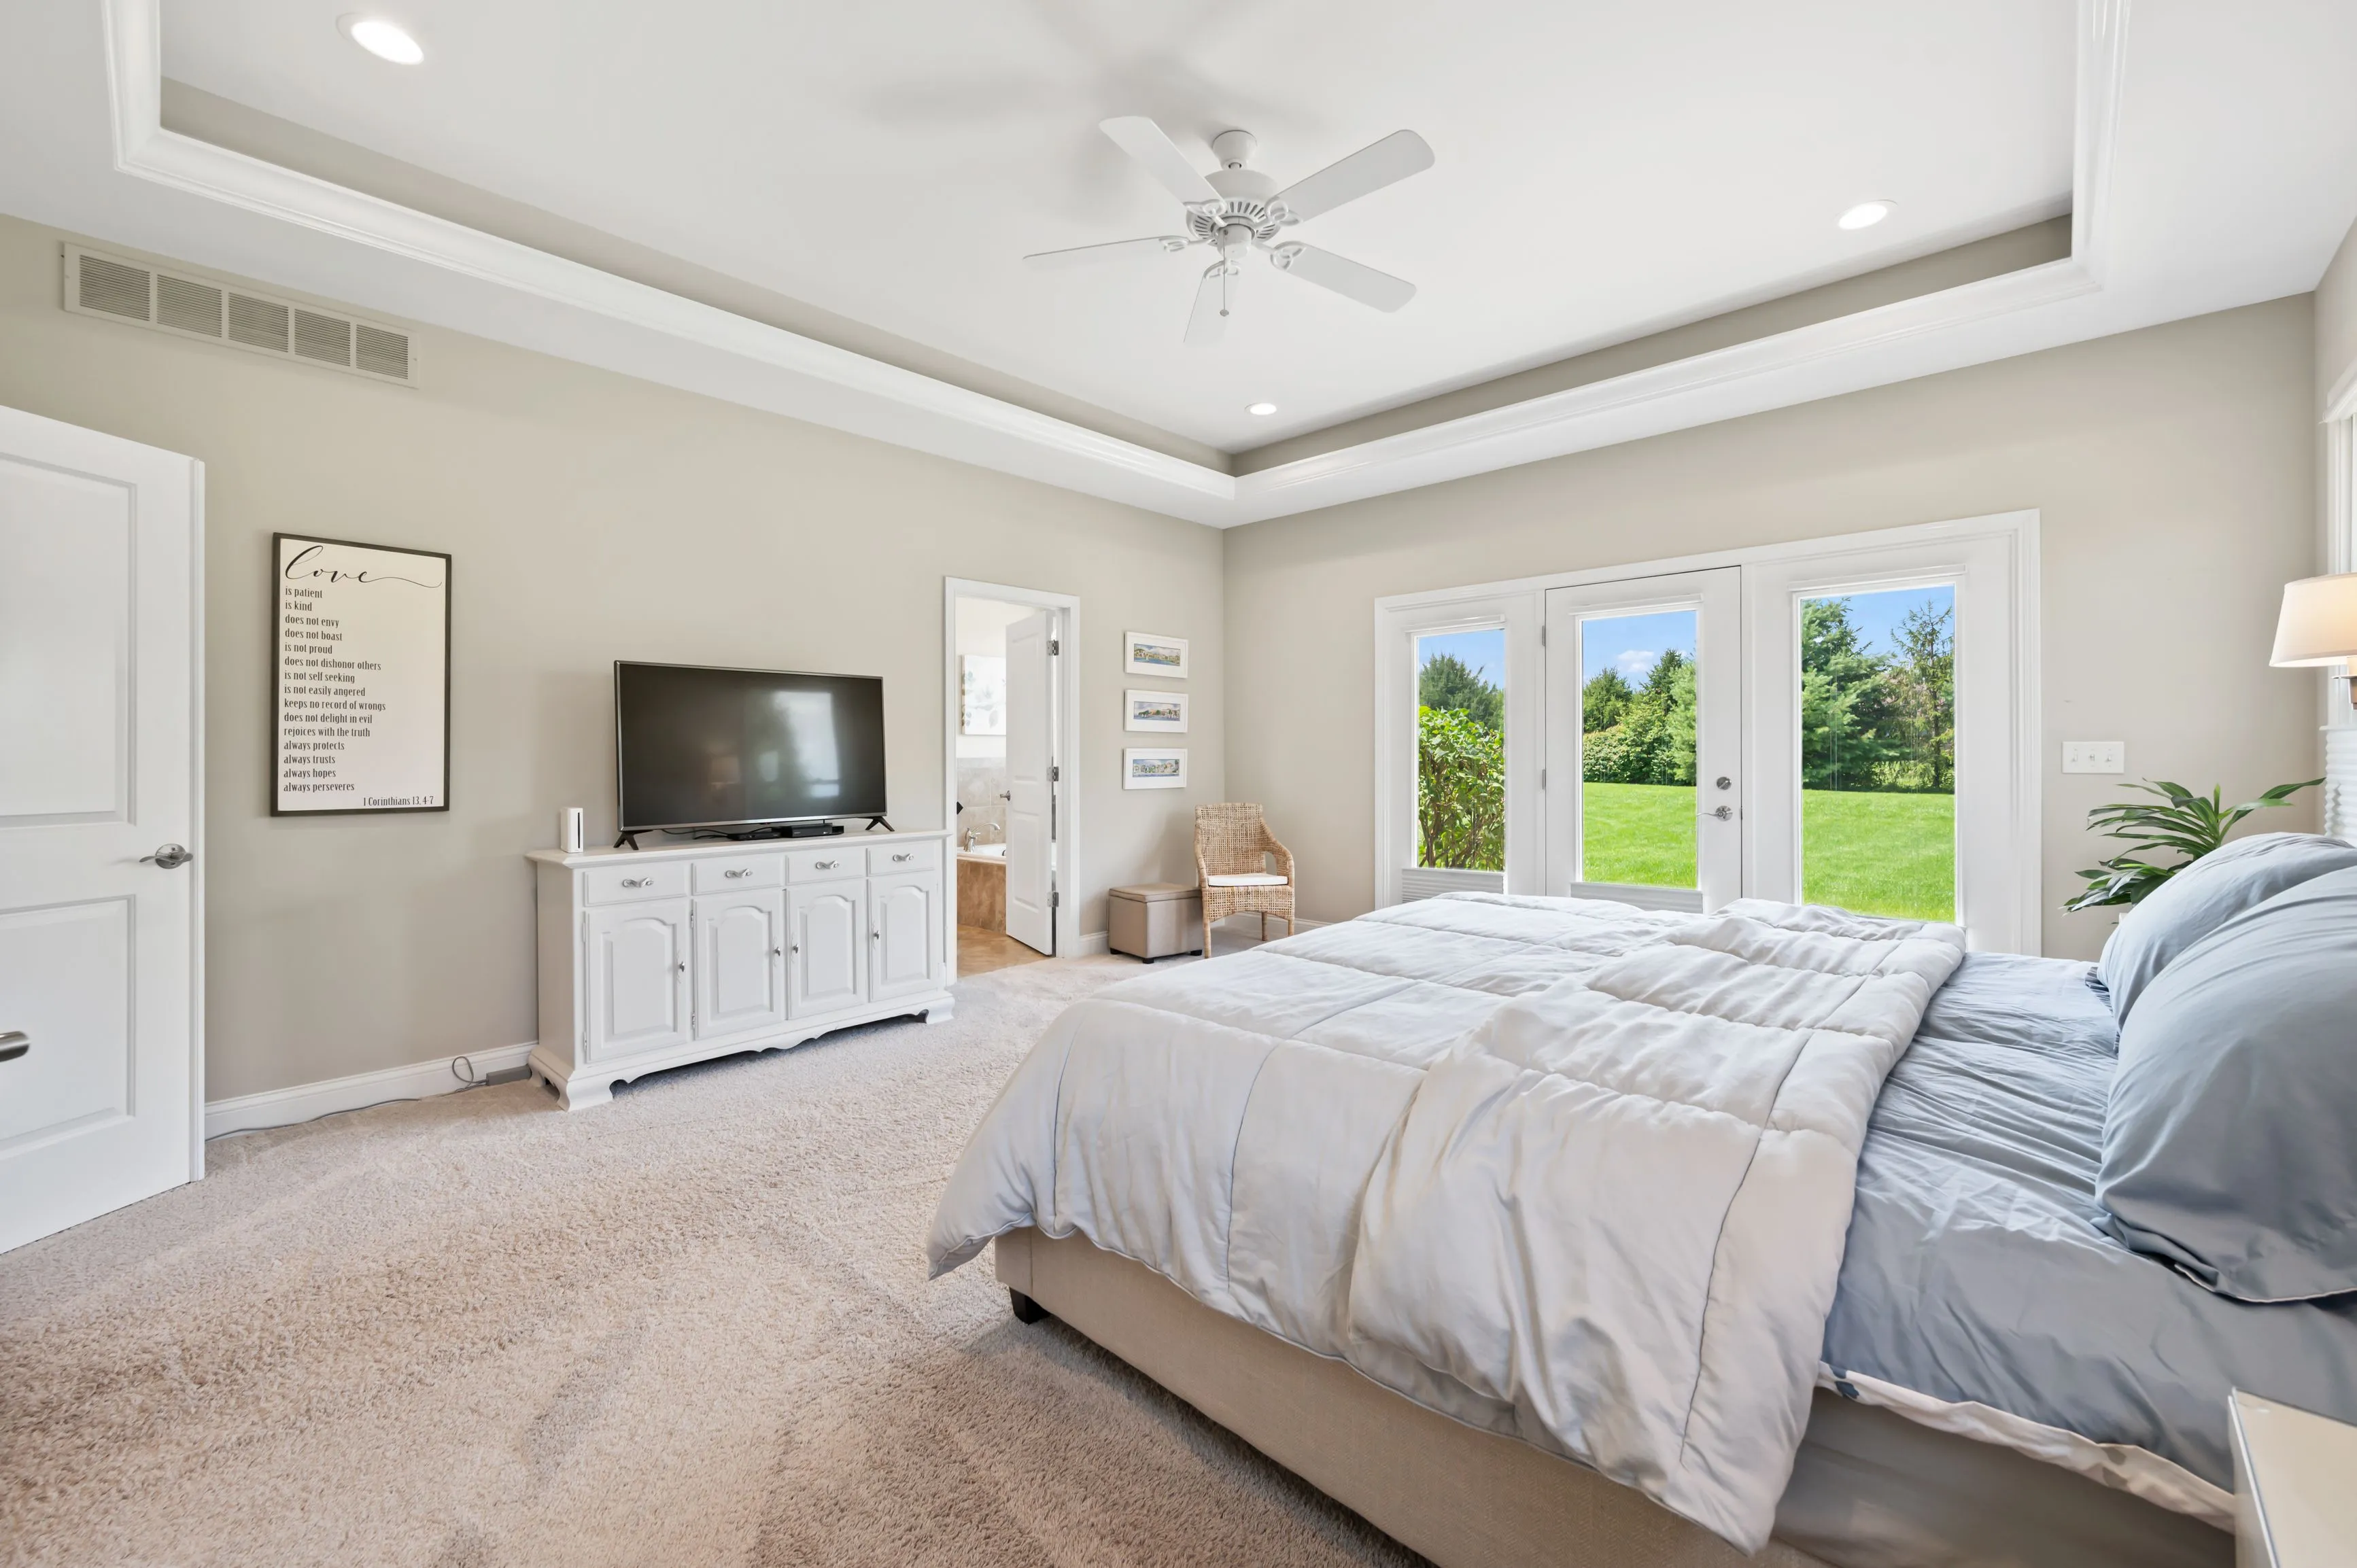 Bright and spacious bedroom with a large bed, white linens, ceiling fan, and a view to the garden through open French doors.